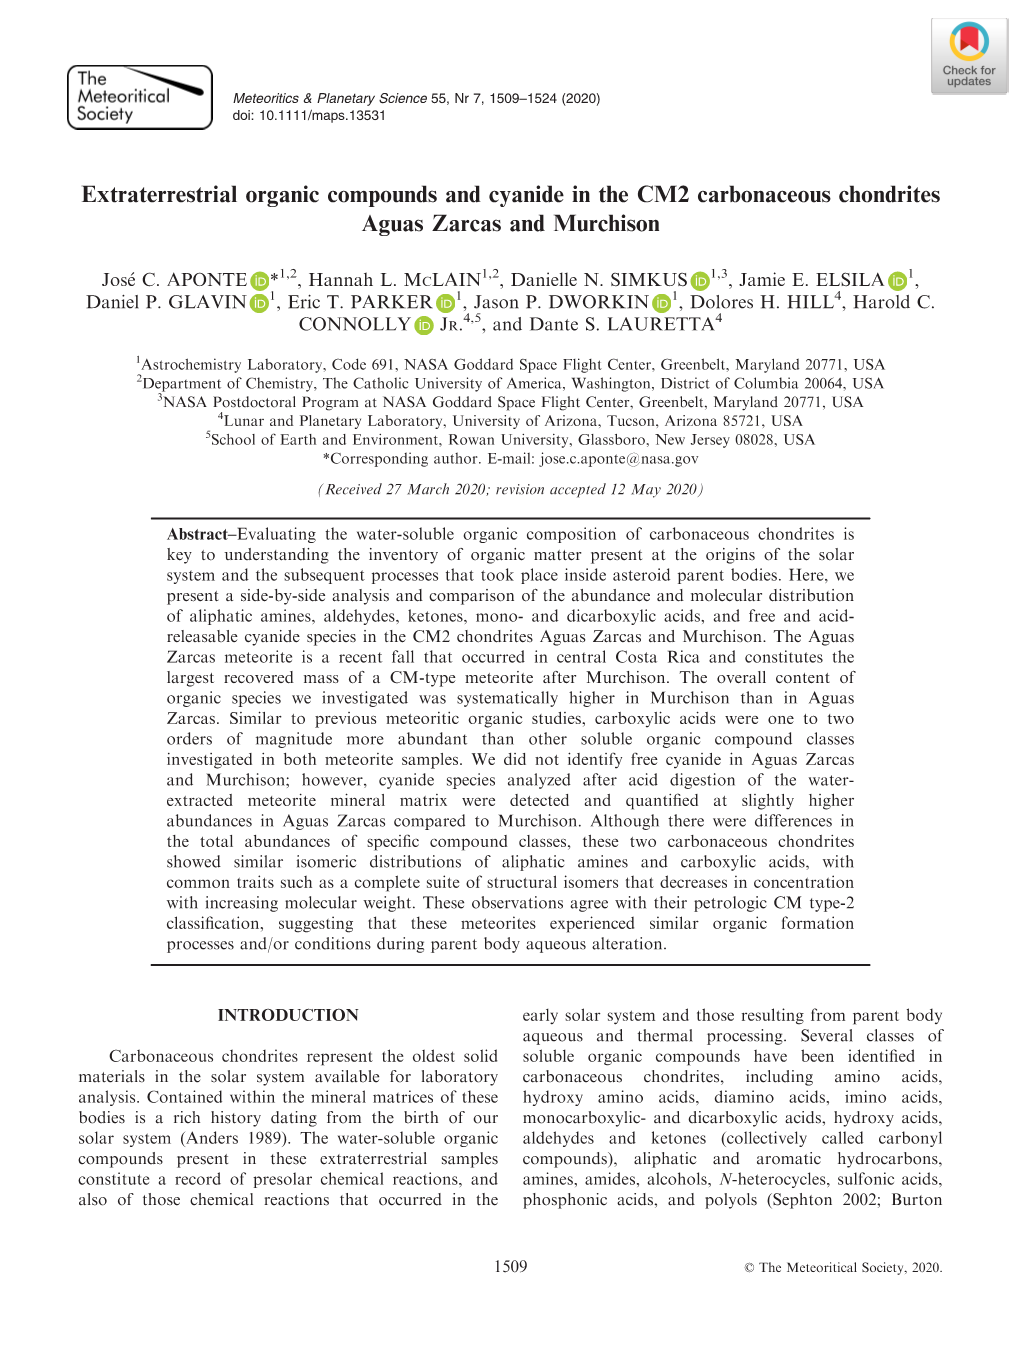 Extraterrestrial Organic Compounds and Cyanide in the CM2 Carbonaceous Chondrites Aguas Zarcas and Murchison